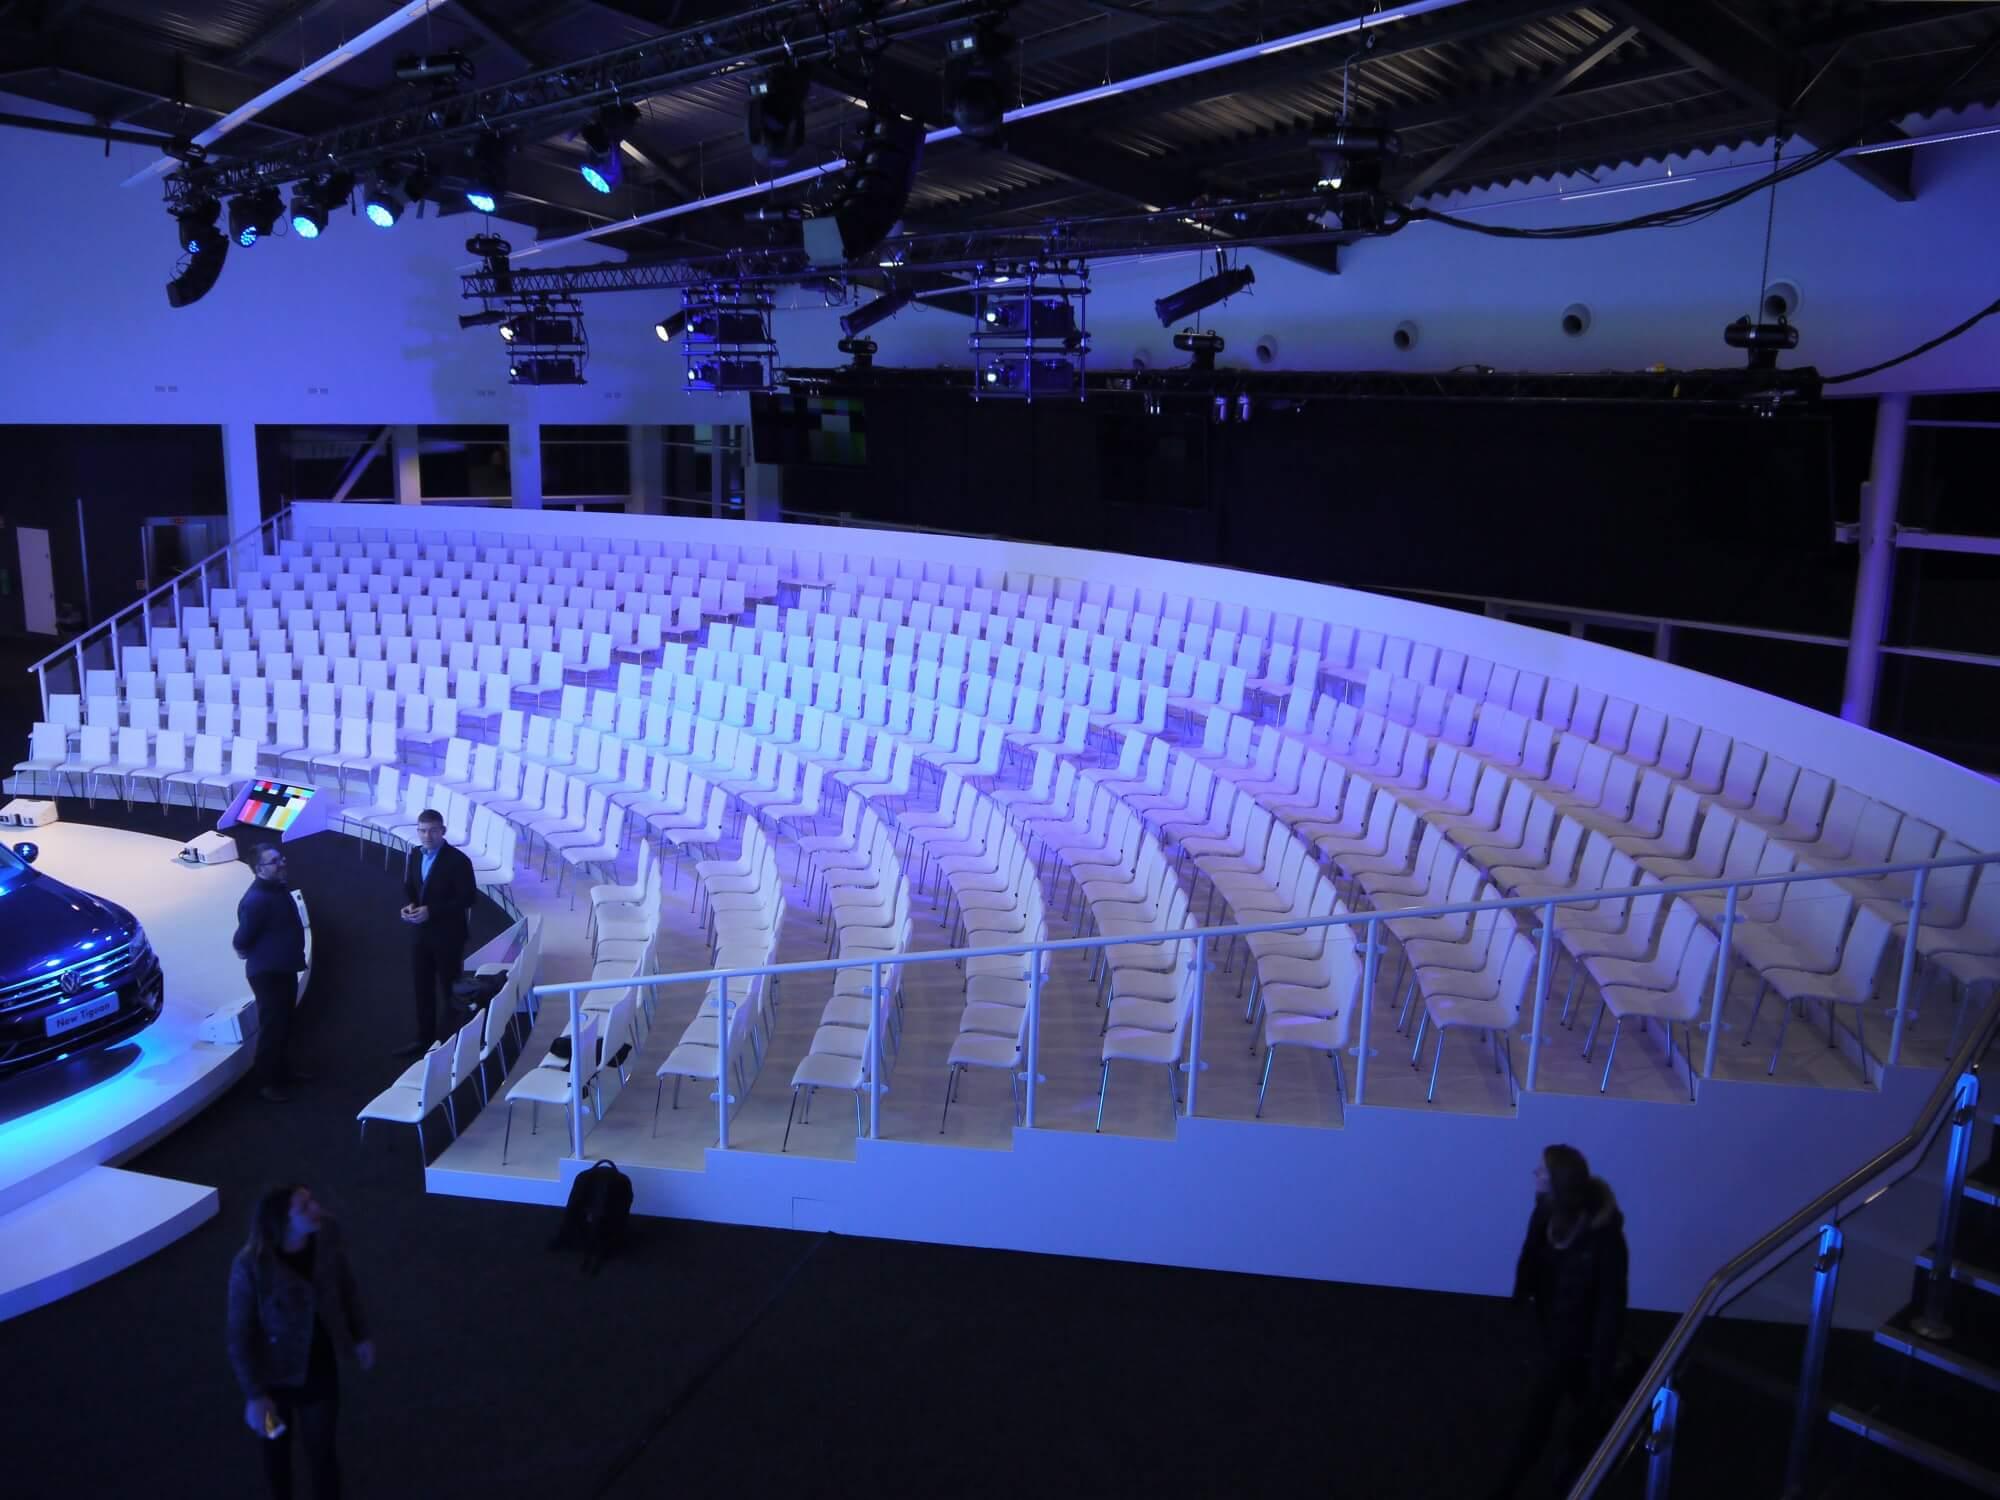 Auditorium at Silverstone ready for an event